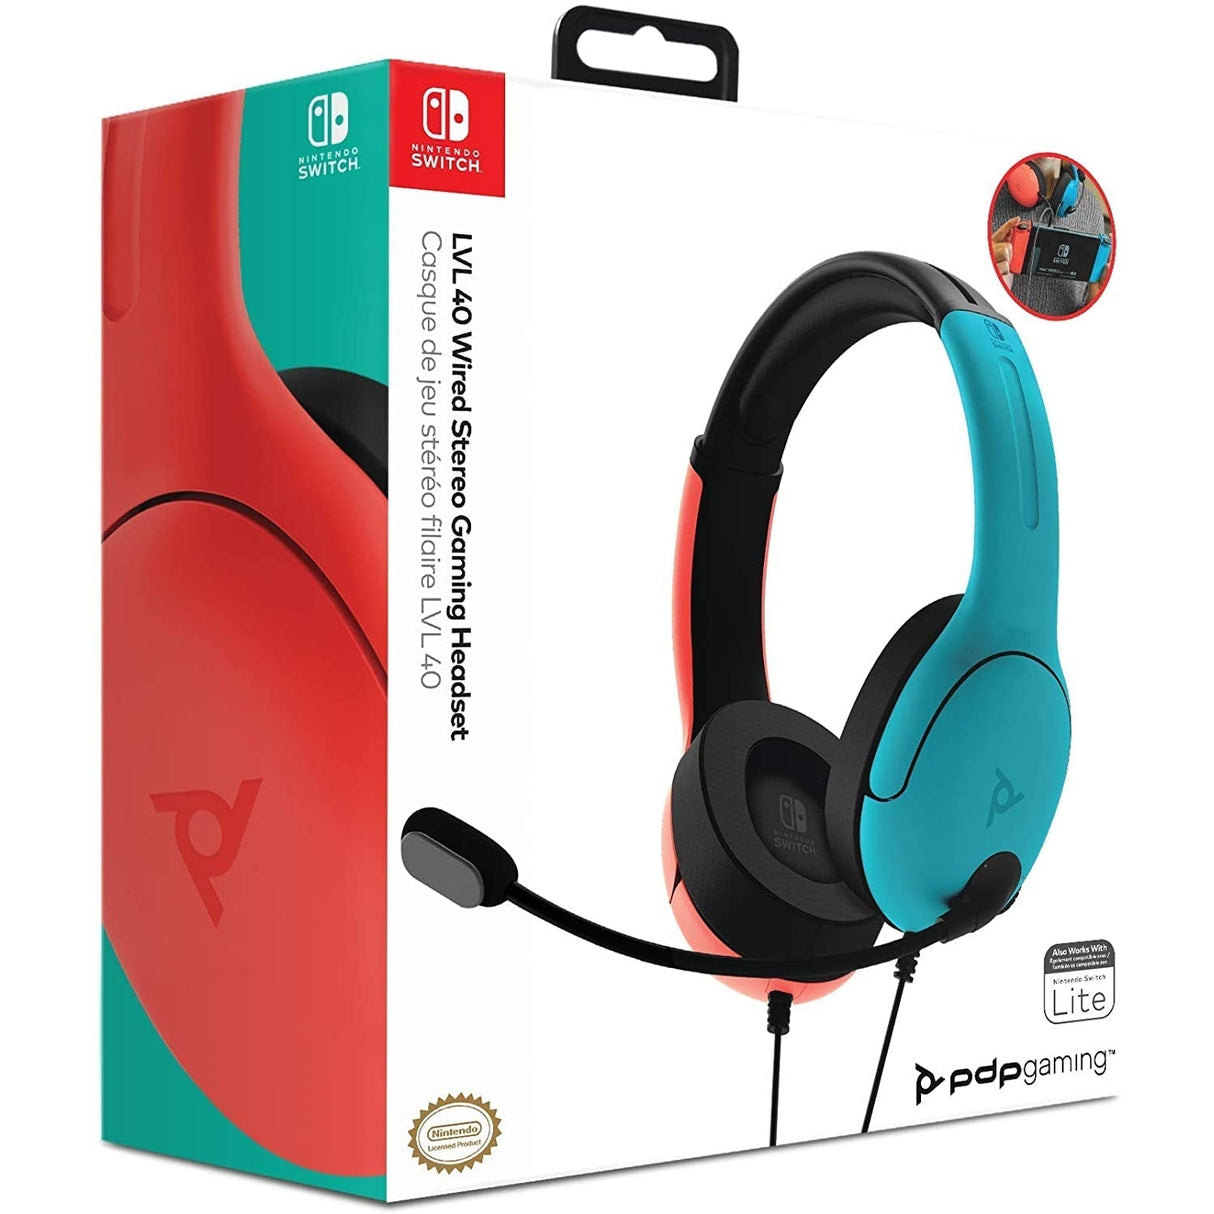 PDP LVL40 Wired Stereo Headset for Nintendo Switch - Blue/Red - Refurbished Good